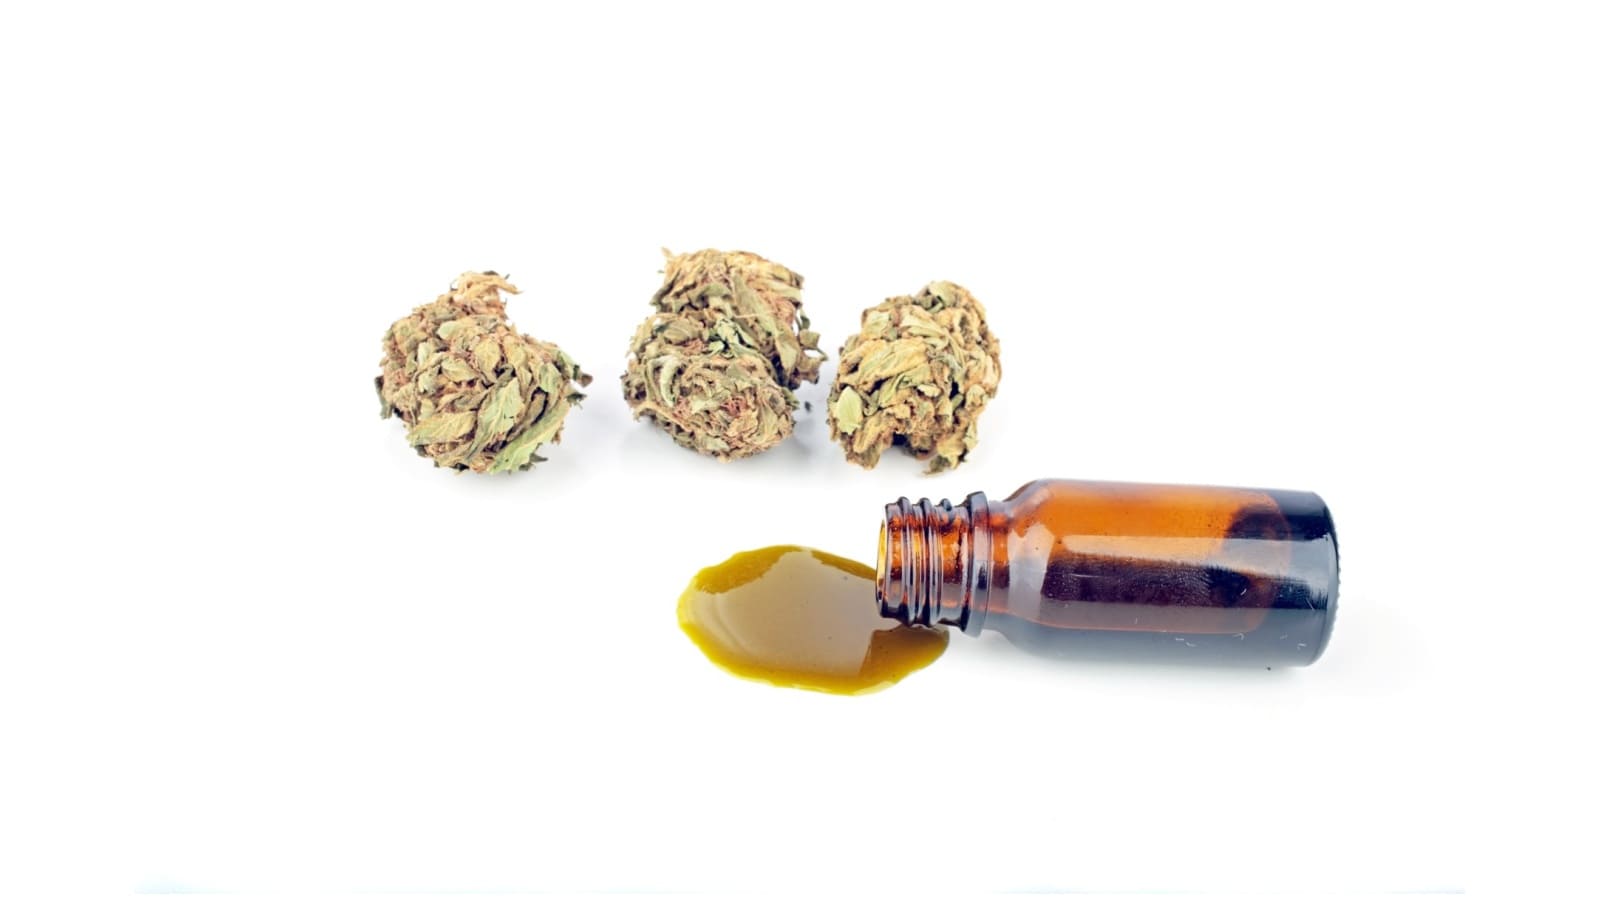 Does Medicare or Health Insurance Cover Medicinal Cannabis?